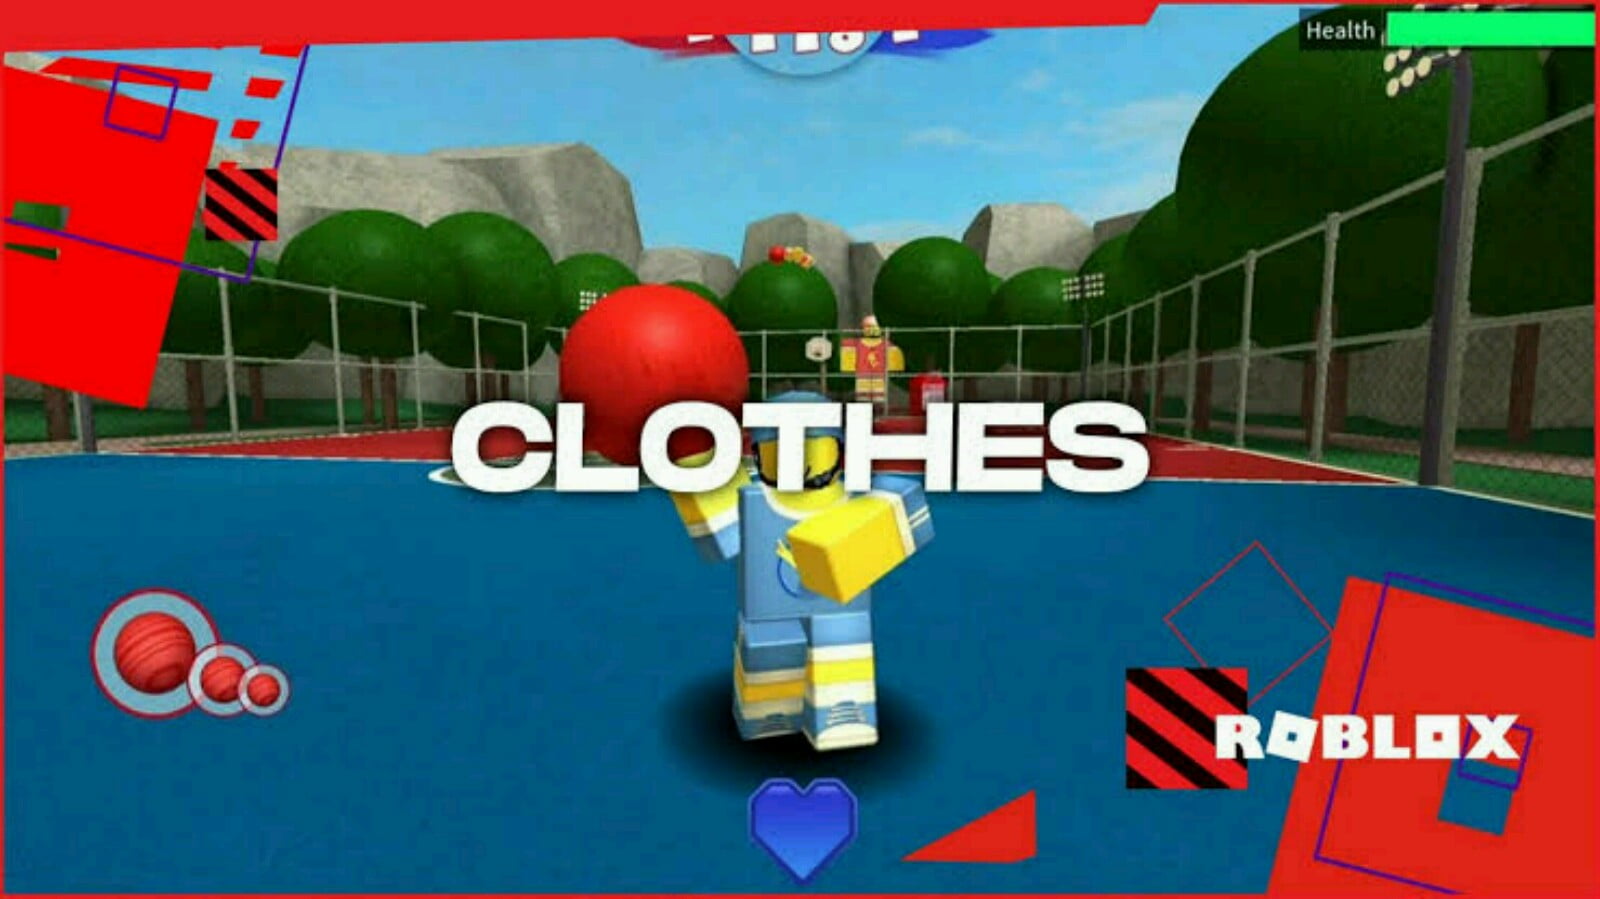 How To Make Clothes On Roblox 100 Working - 10 awesome roblox admin outfits